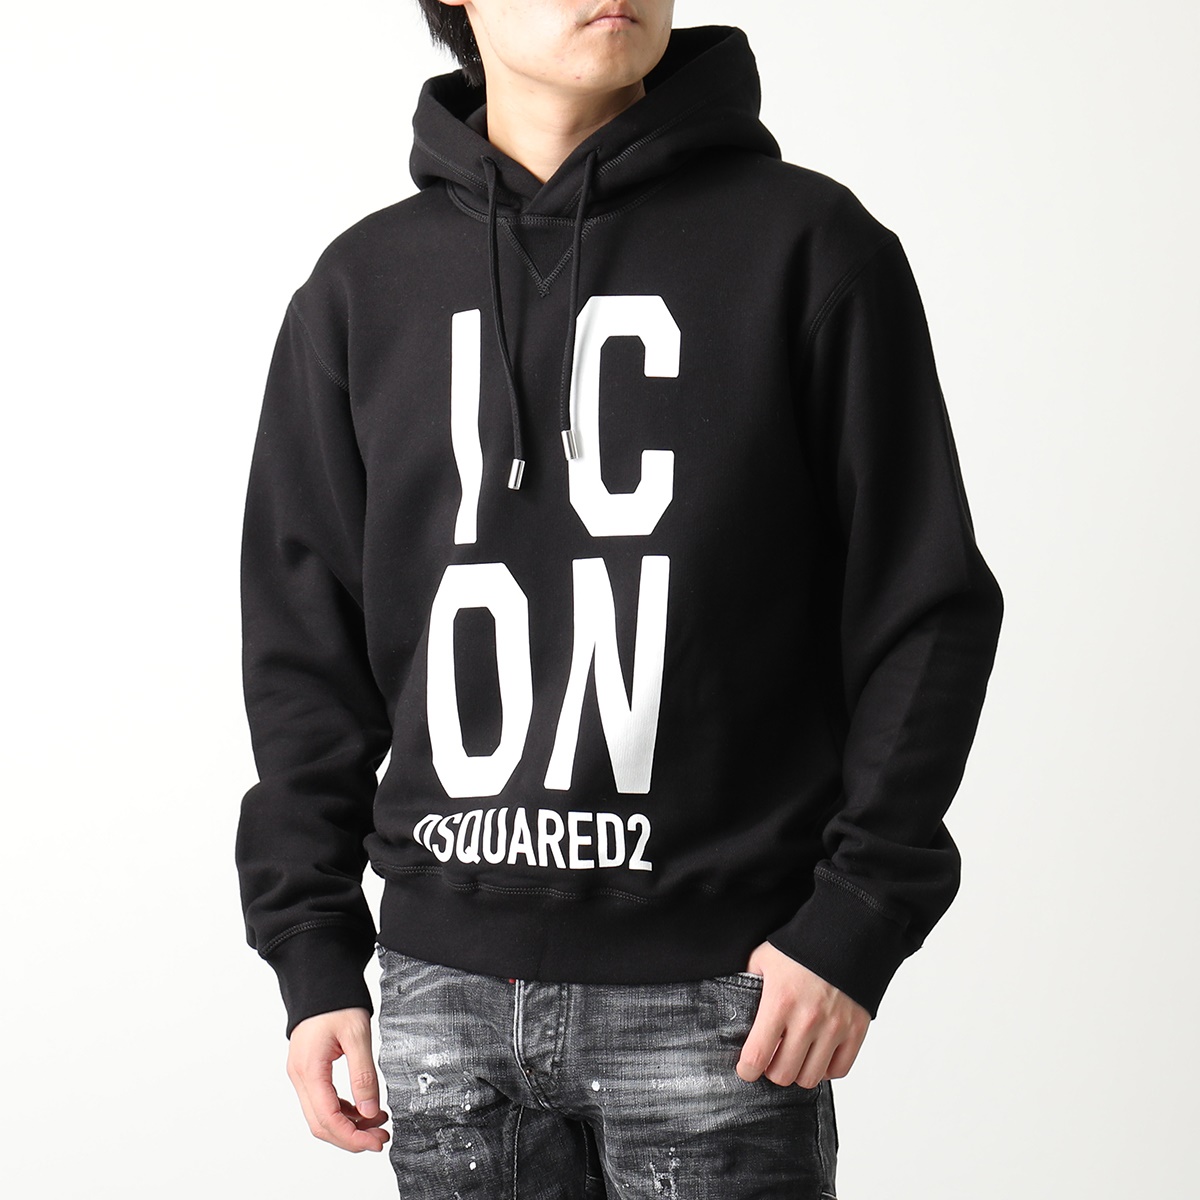 DSQUARED2 ディースクエアード パーカー ICON SQUARED COOL HOODIE S79GU0108 S25516 メンズ ロゴ プルオーバー スウェット カラー2色｜s-musee｜02